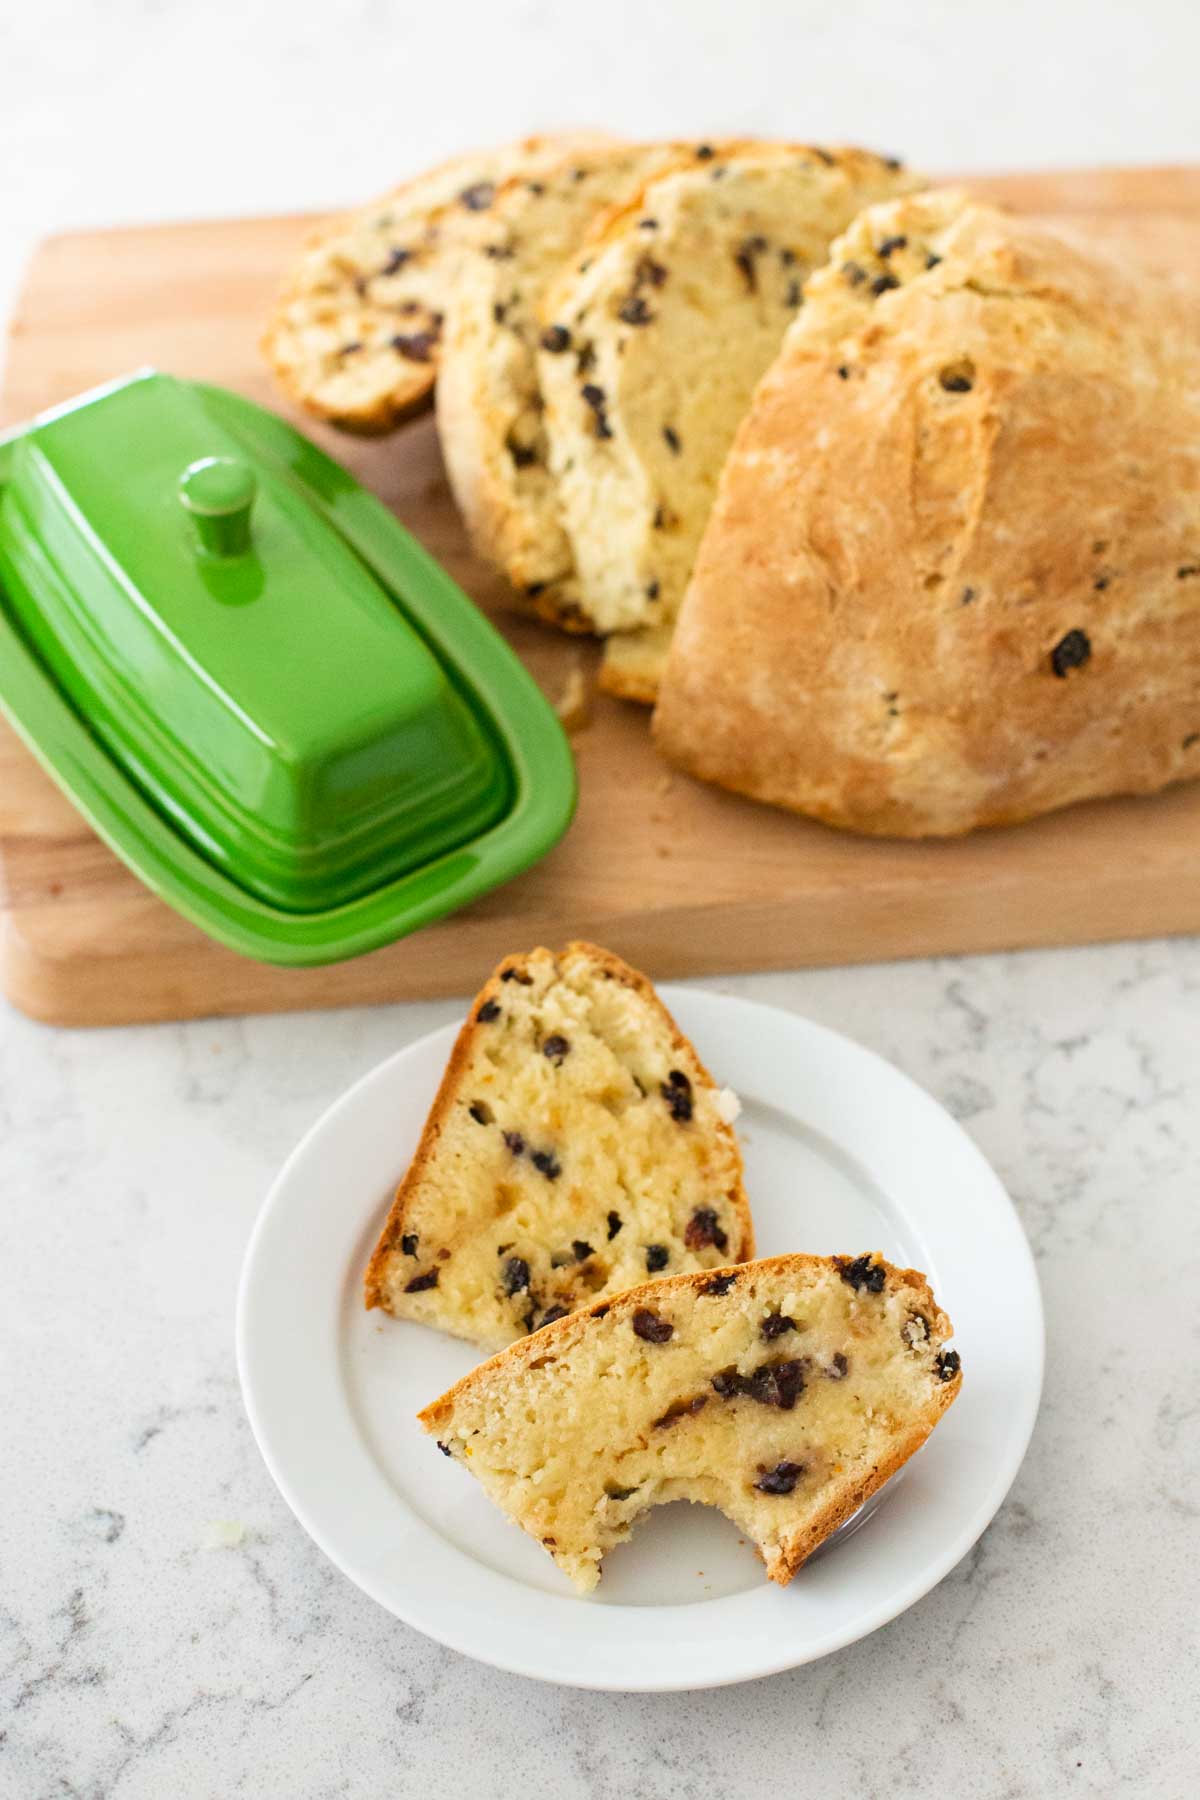 The Irish soda bread has been sliced and served with a pat of butter on a small plate. The butter dish sits on the cutting board next to the loaf.